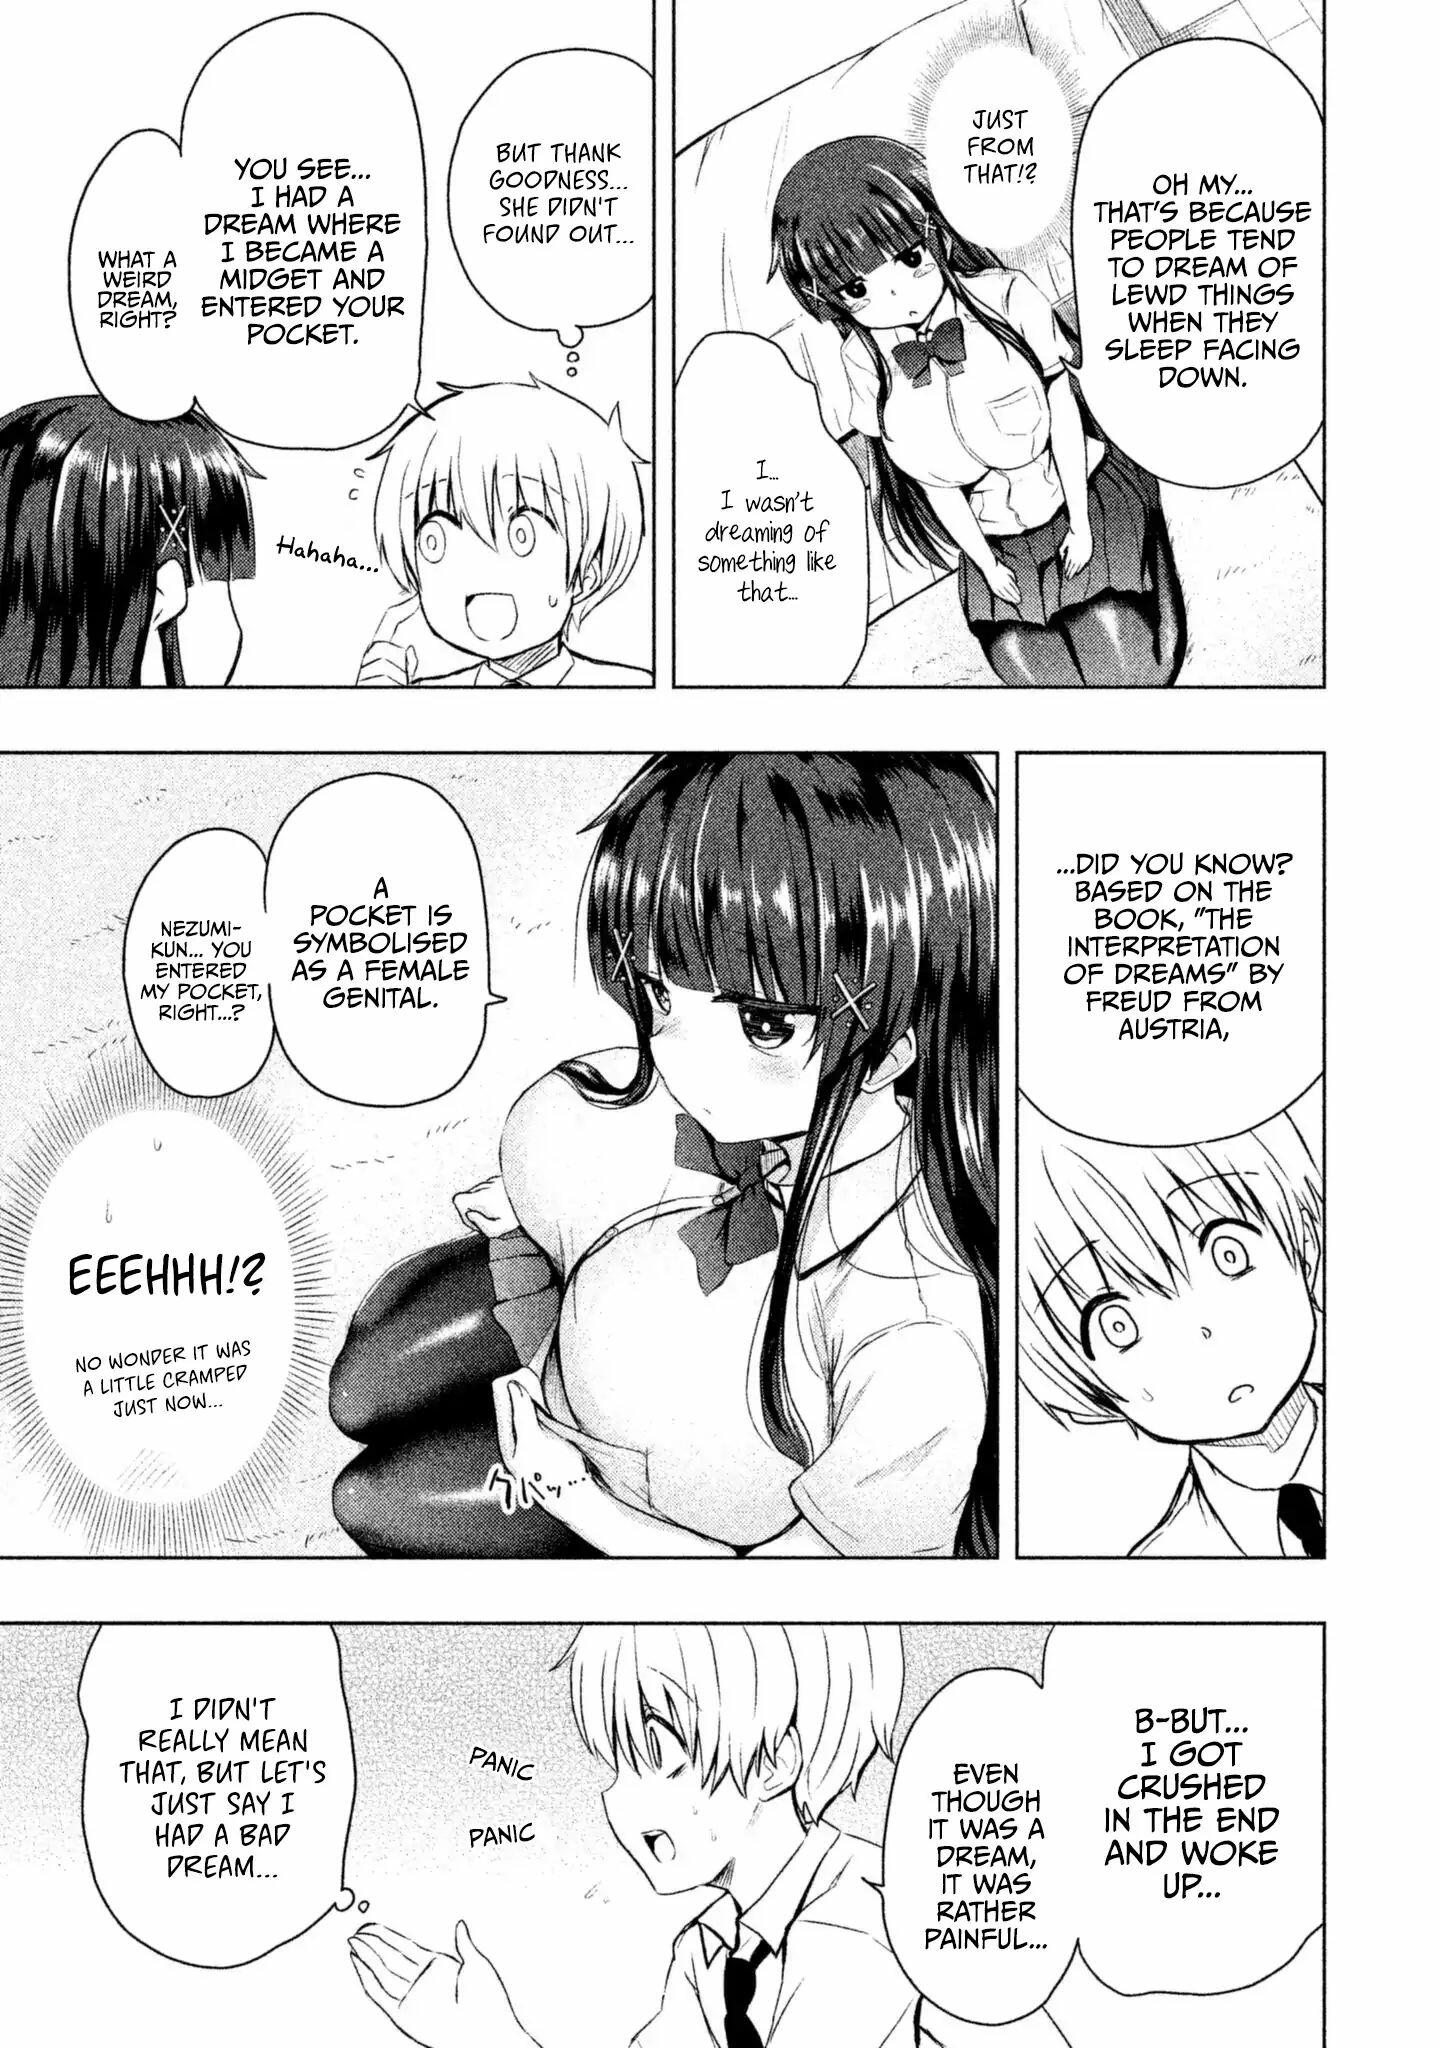 A Girl Who Is Very Well-Informed About Weird Knowledge, Takayukashiki Souko-San Vol.1 Chapter 12: Dream page 6 - Mangakakalots.com